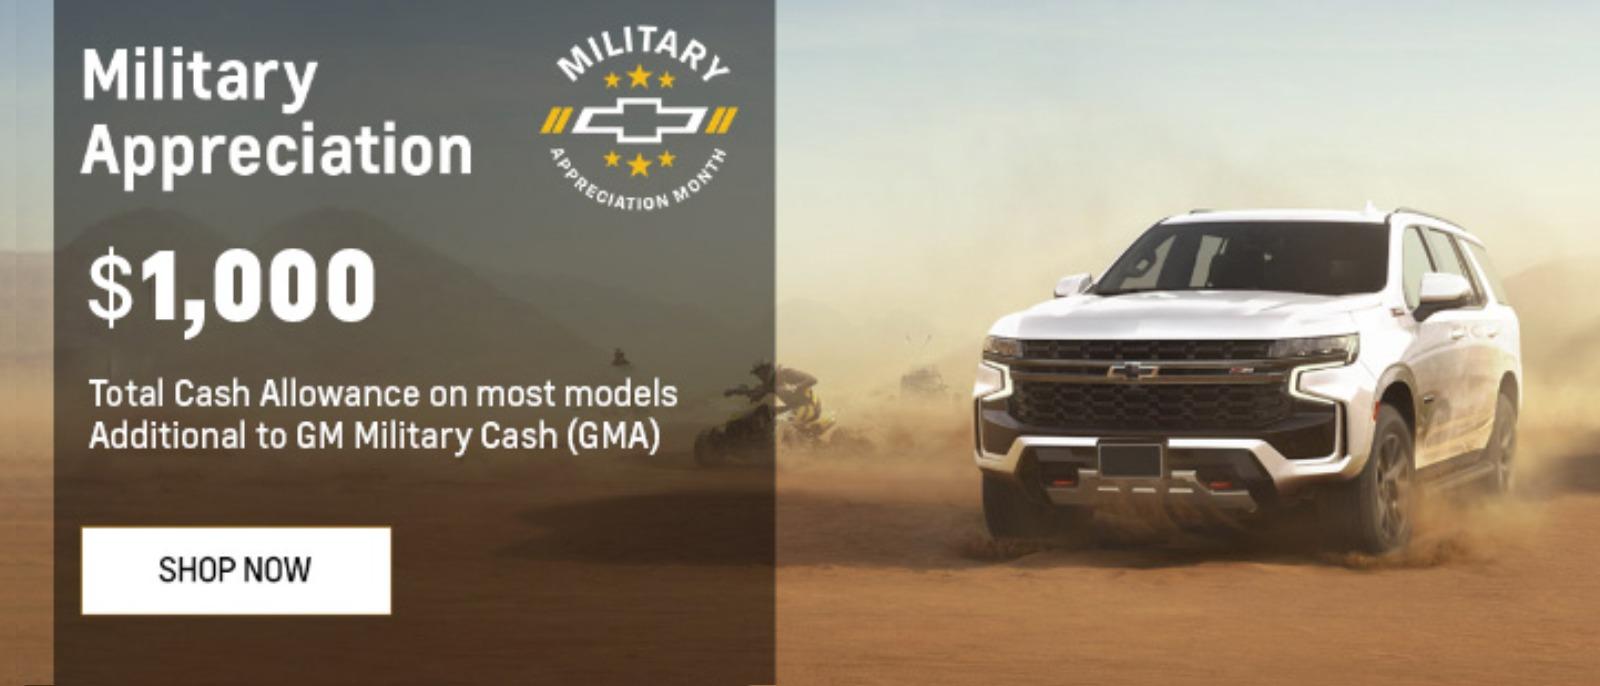 Military Appreciation
$1,000 TOTAL CASH ALLOWANCE
On most models